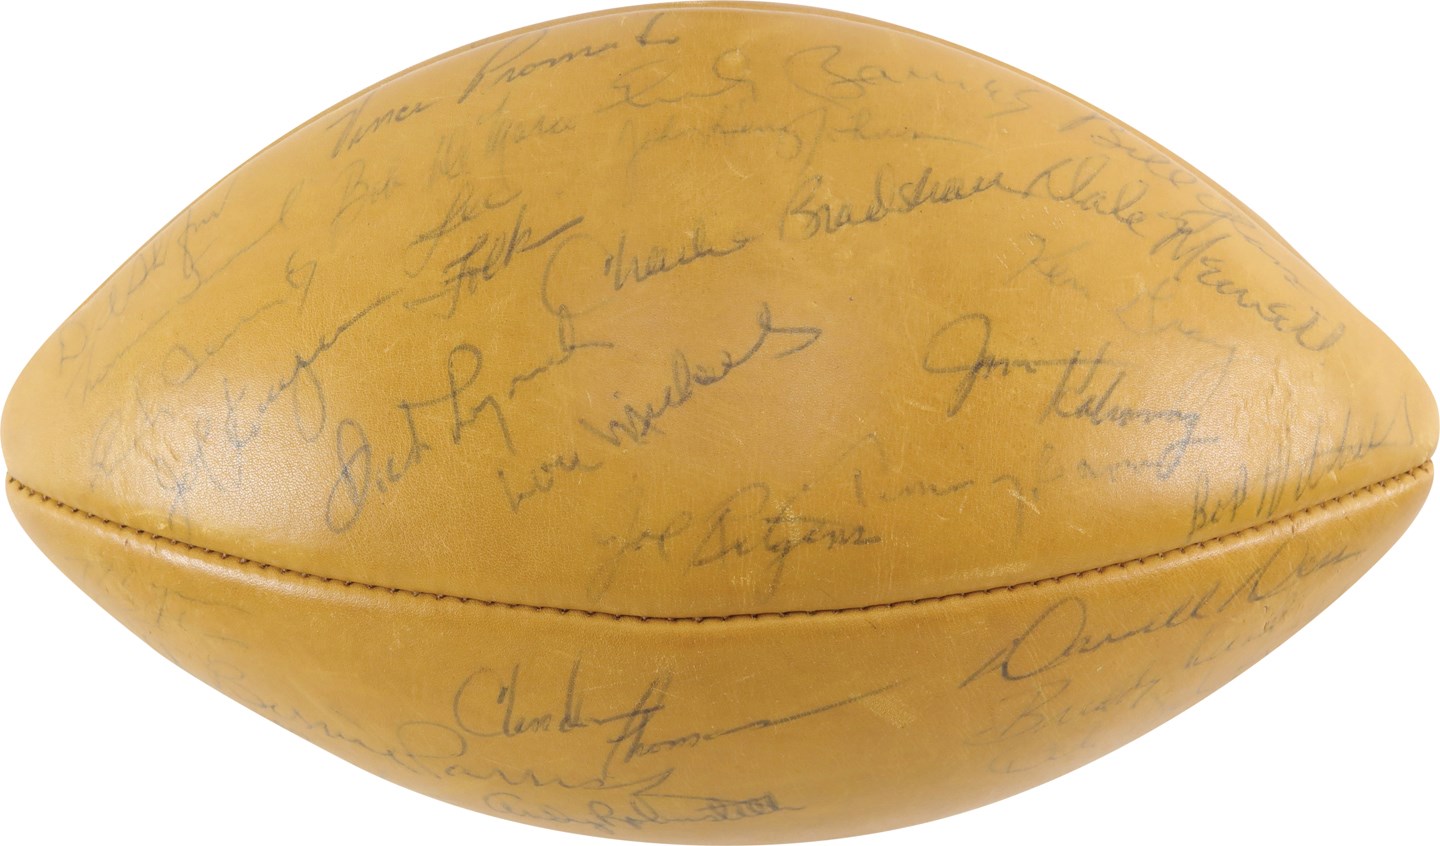 Football - 1963 Pro Bowl Team-Signed Football with Jim Brown (JSA)